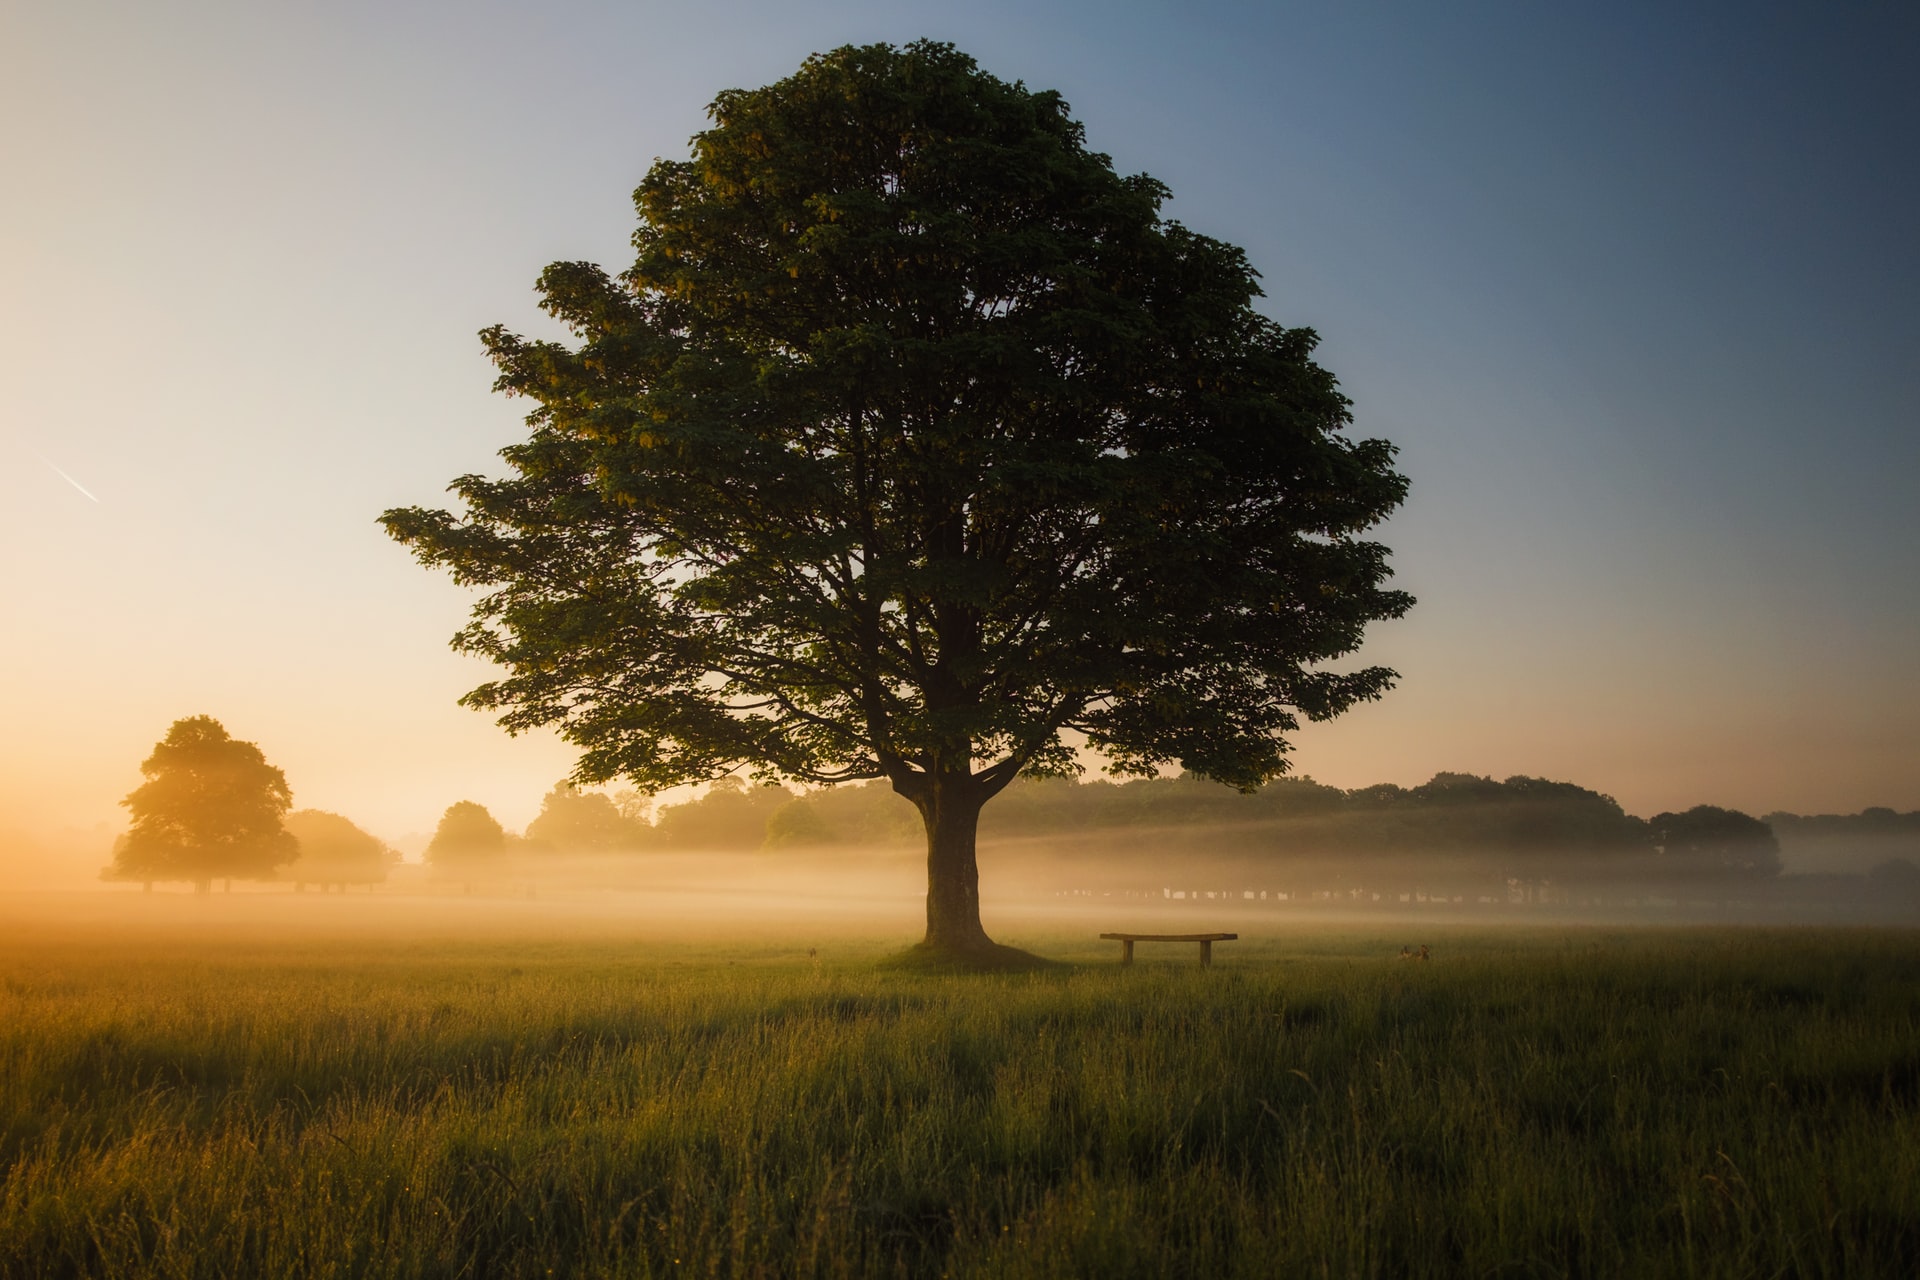 Tree with a seat underneath in a misty sunlit field